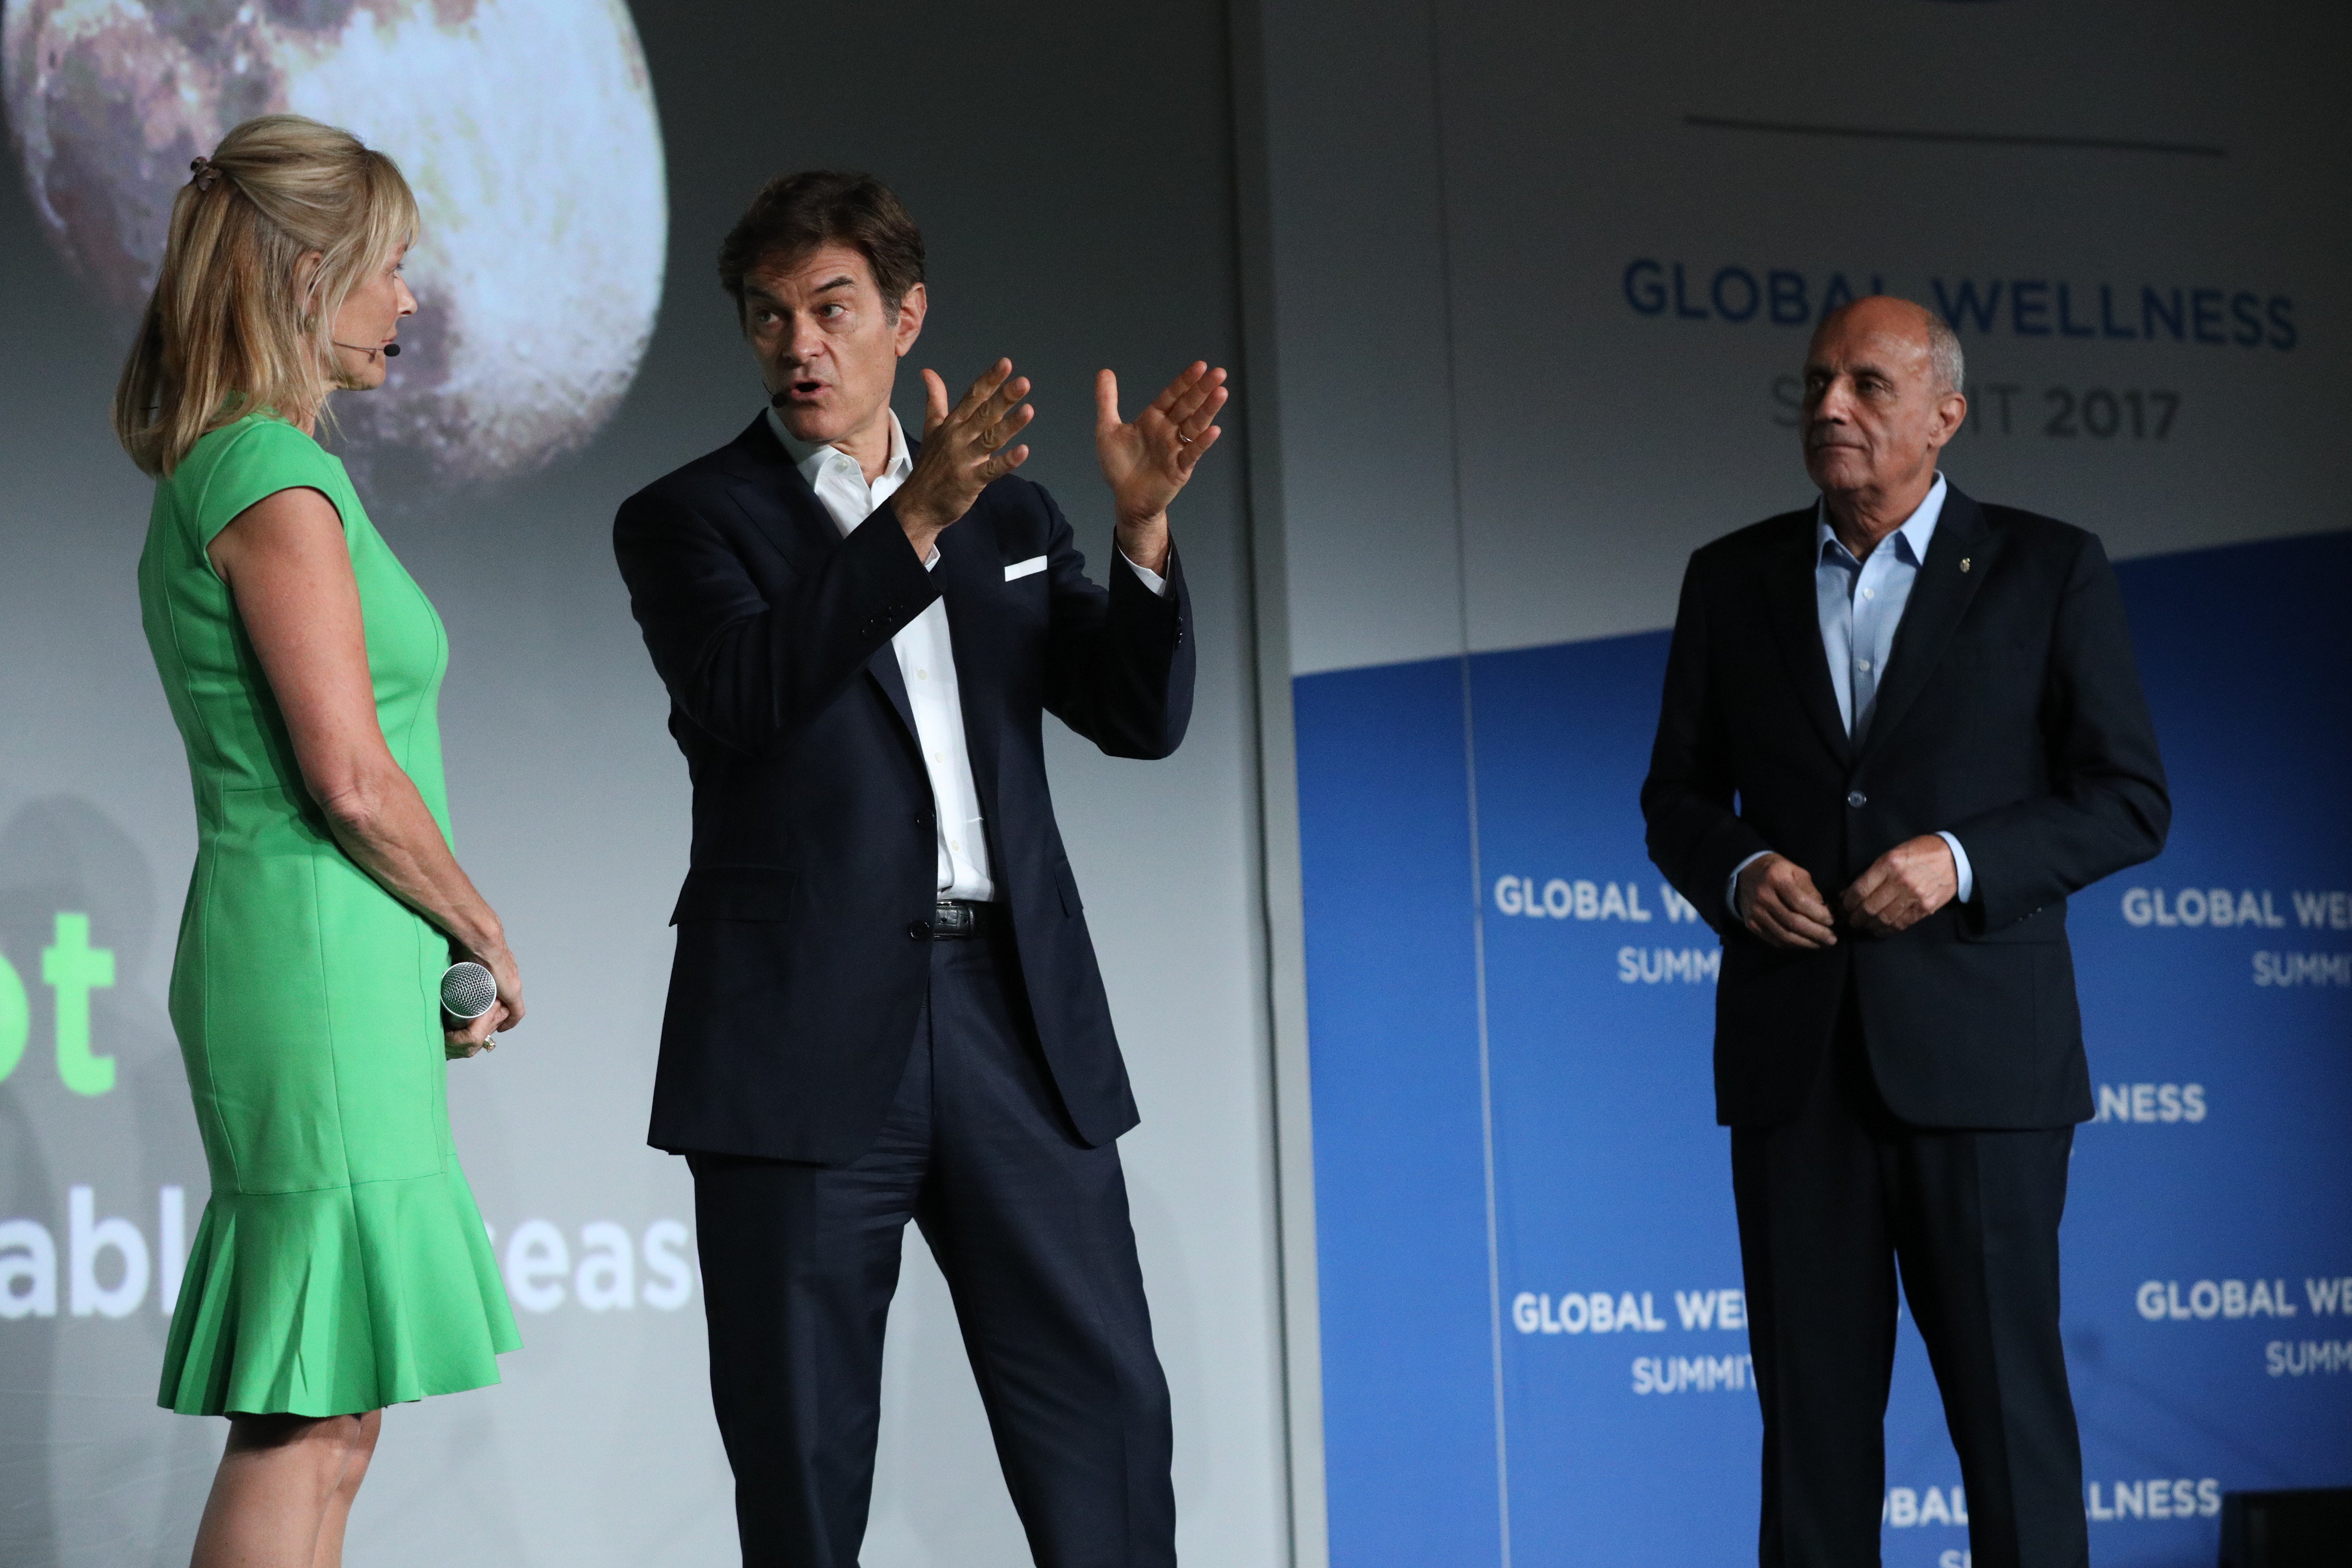 Dr. Mehmet C. Oz underscored the importance of the Wellness Moonshot, announced by the Global Wellness Institute at the 2017 Global Wellness Summit.